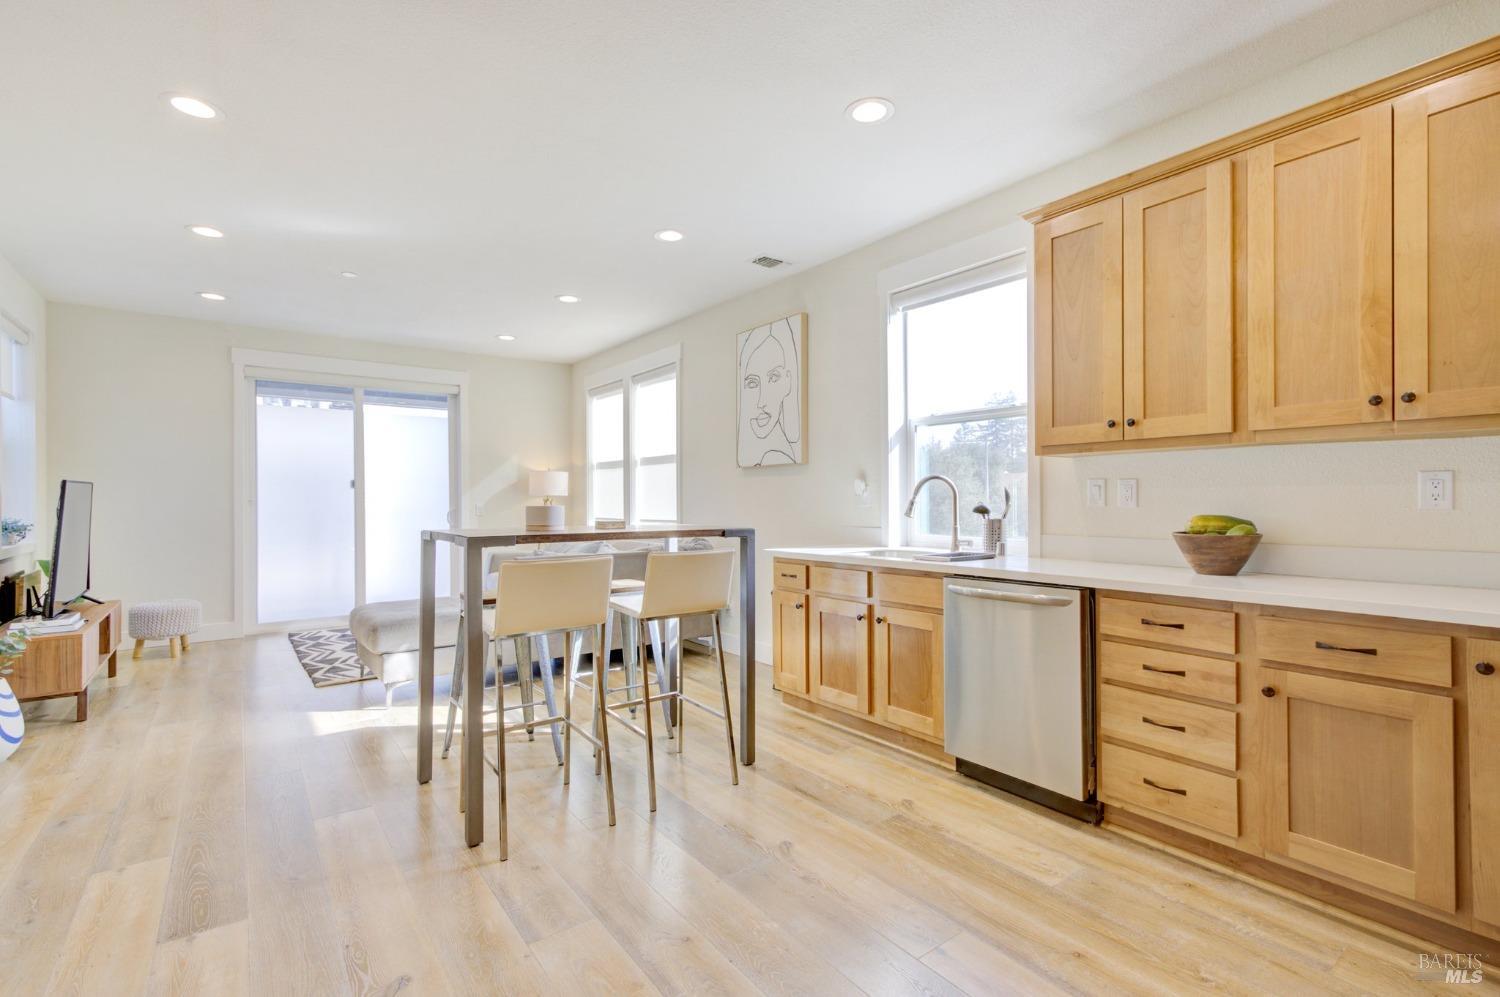 The spacious kitchen and living area are light and bright with plenty of cabinet space.